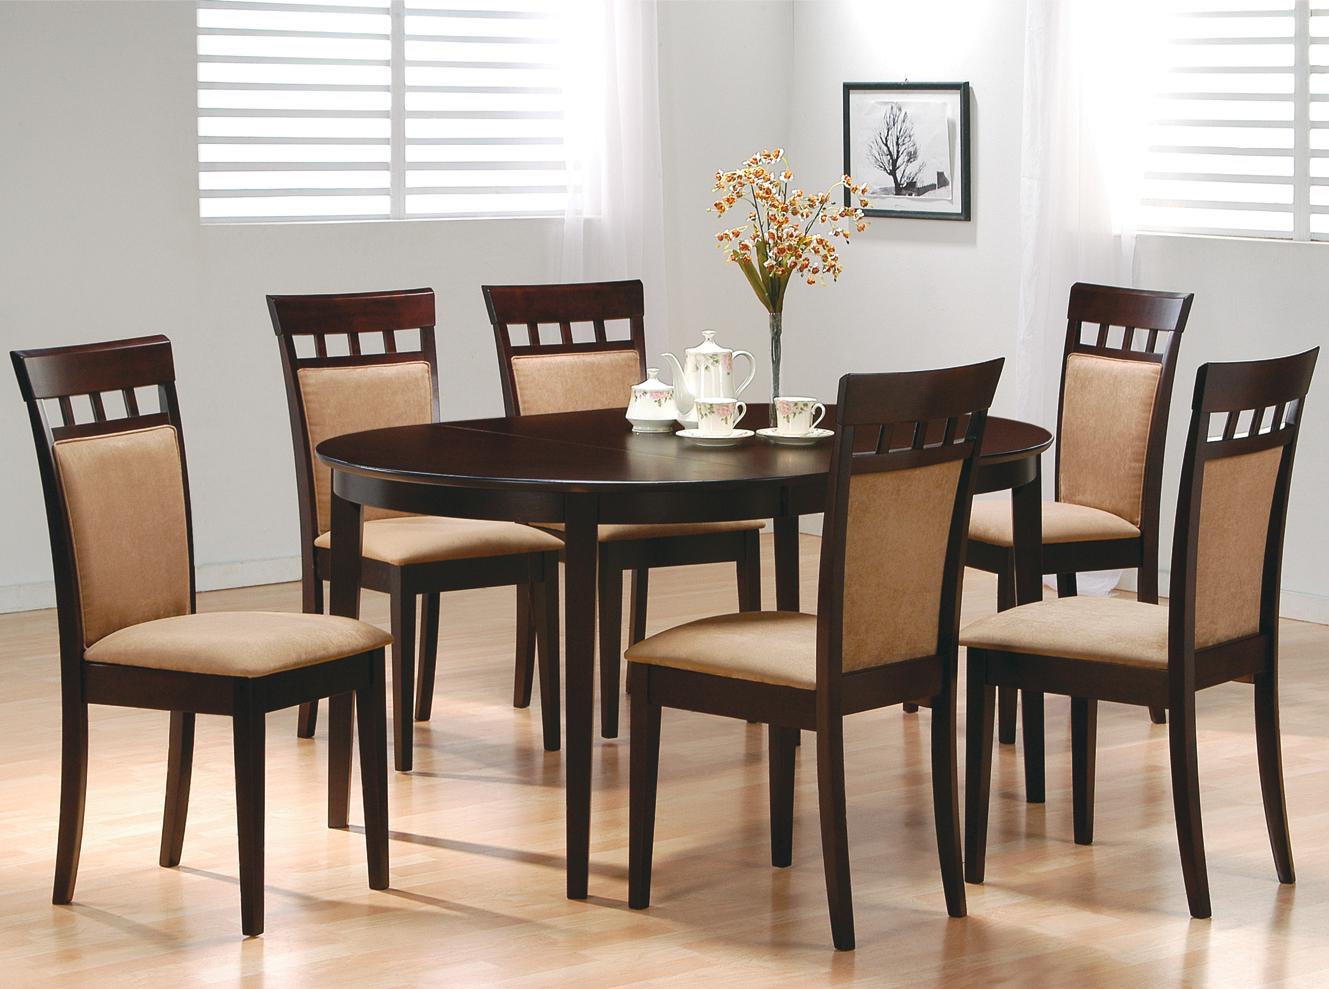 How To Match Dining Table And Chairs